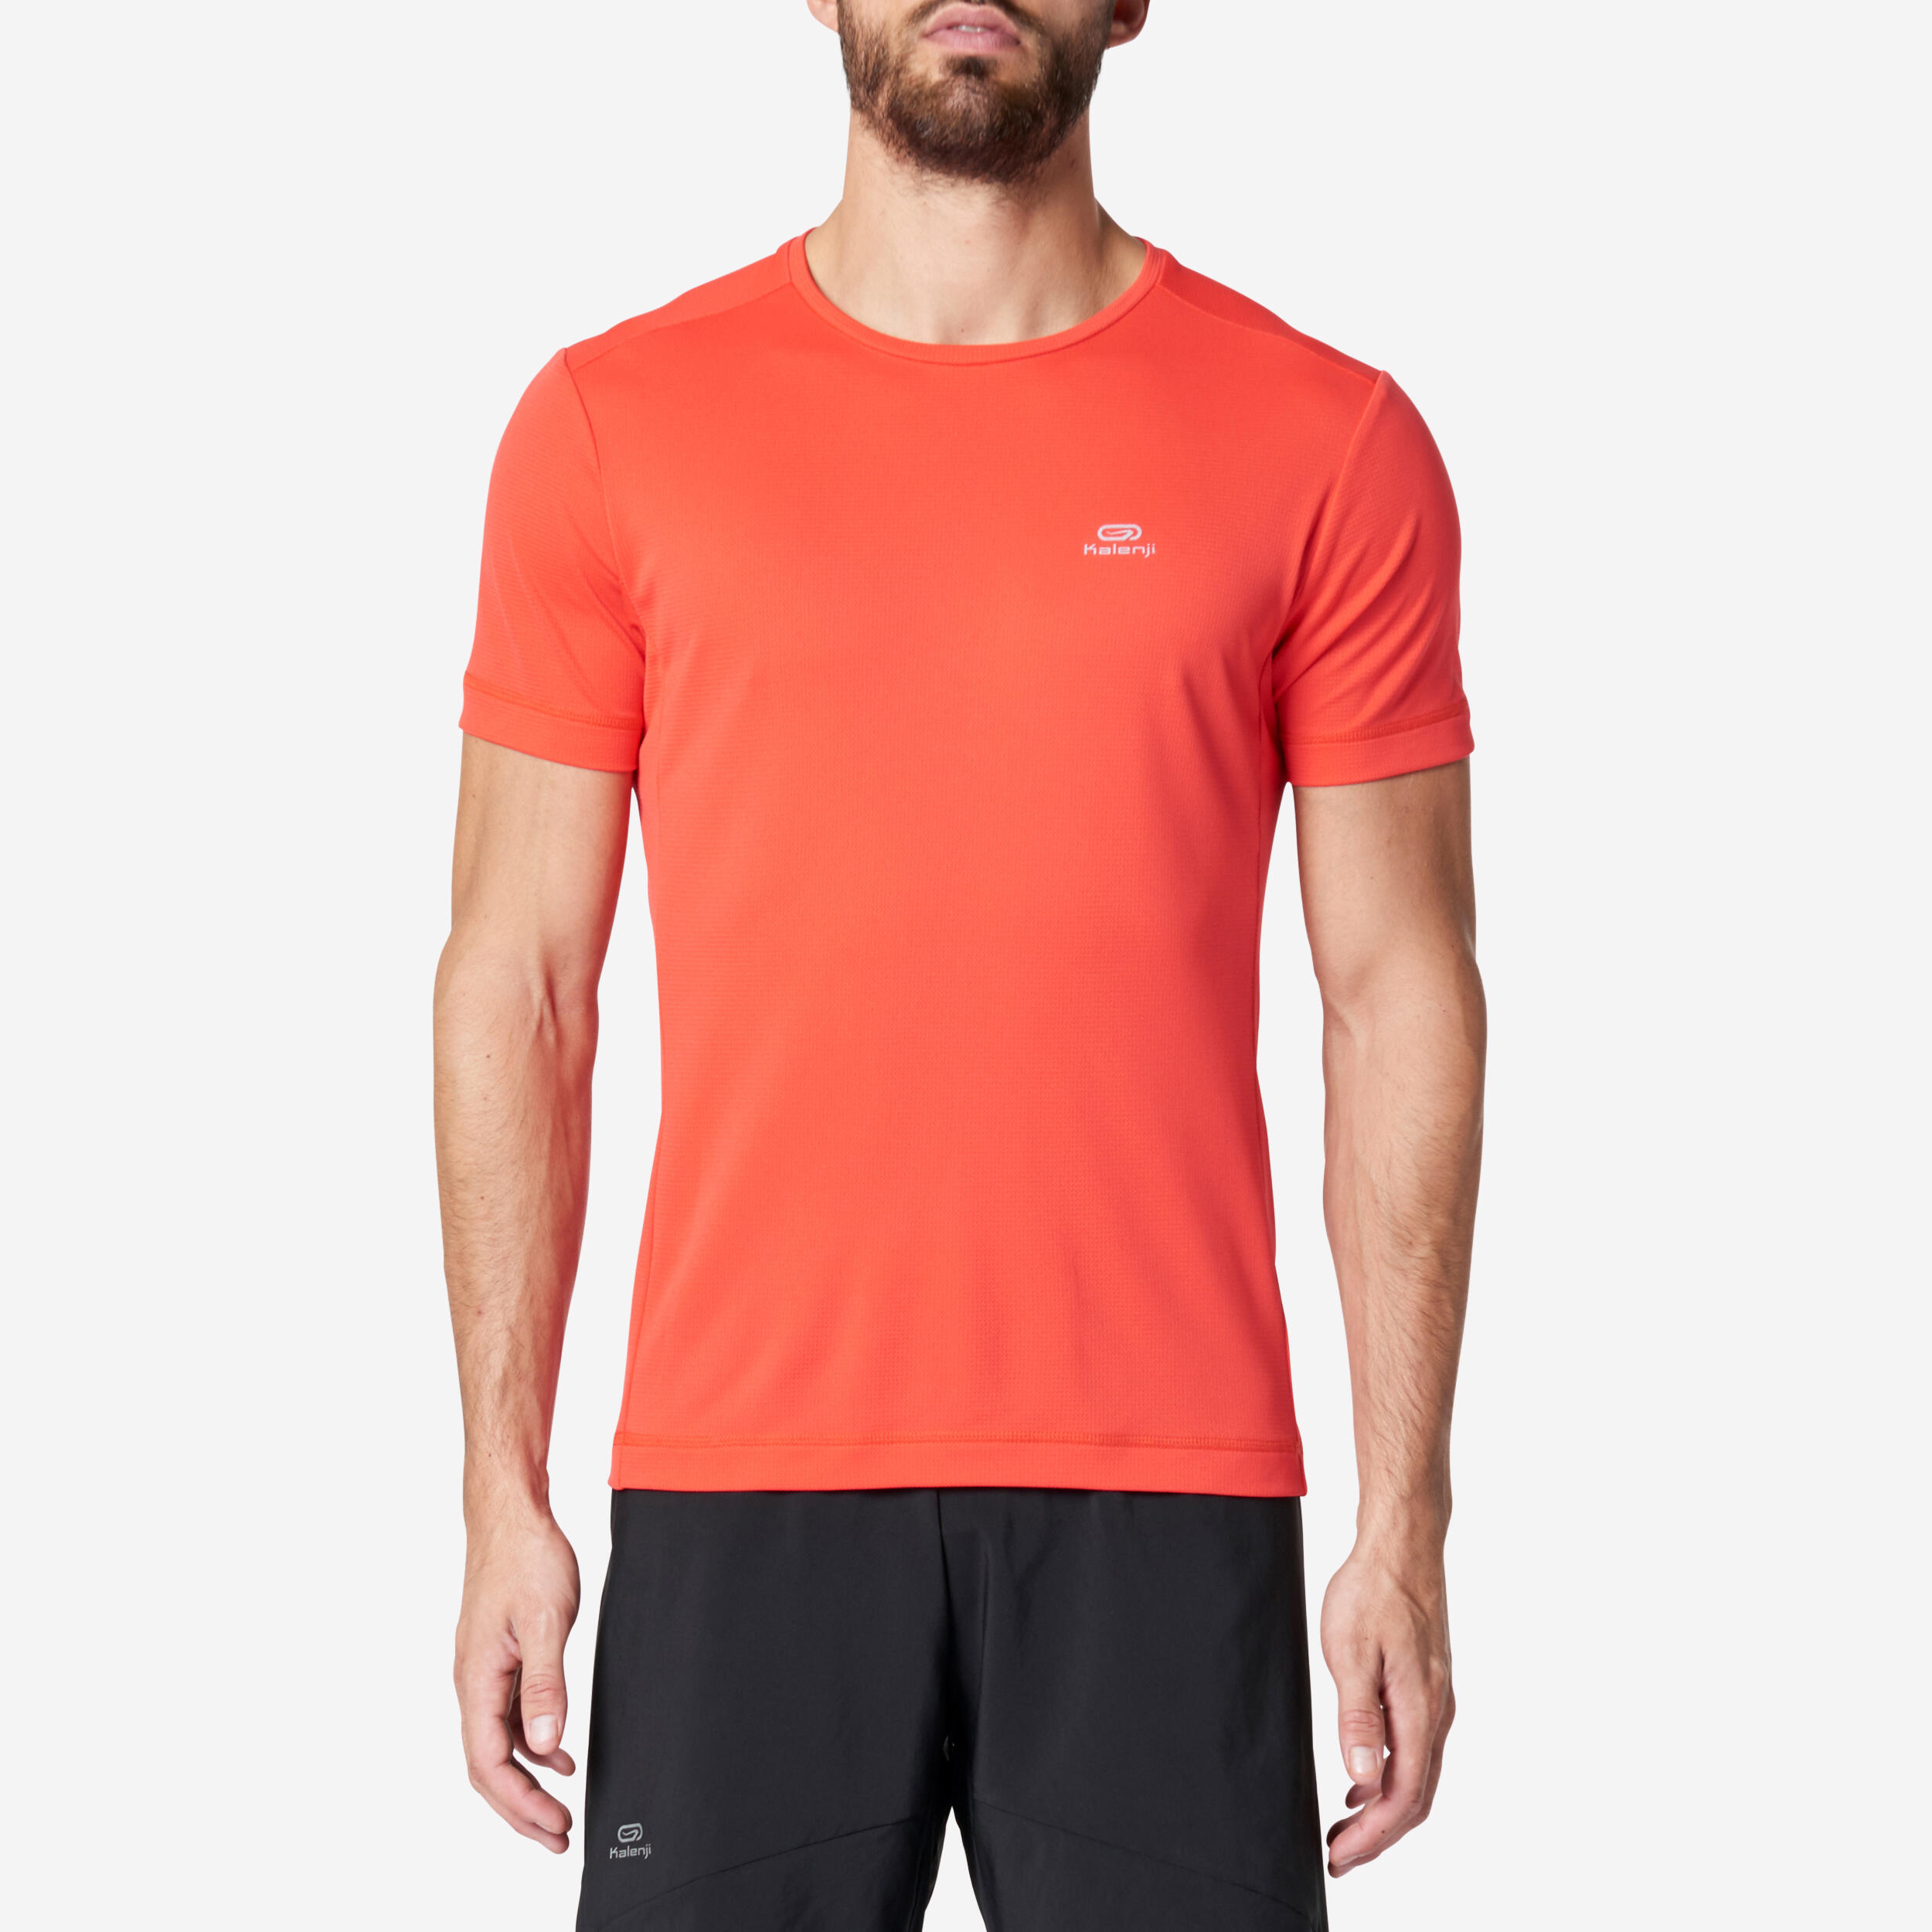 KALENJI Dry Men's Running Breathable T-Shirt - Neon Coral Pink